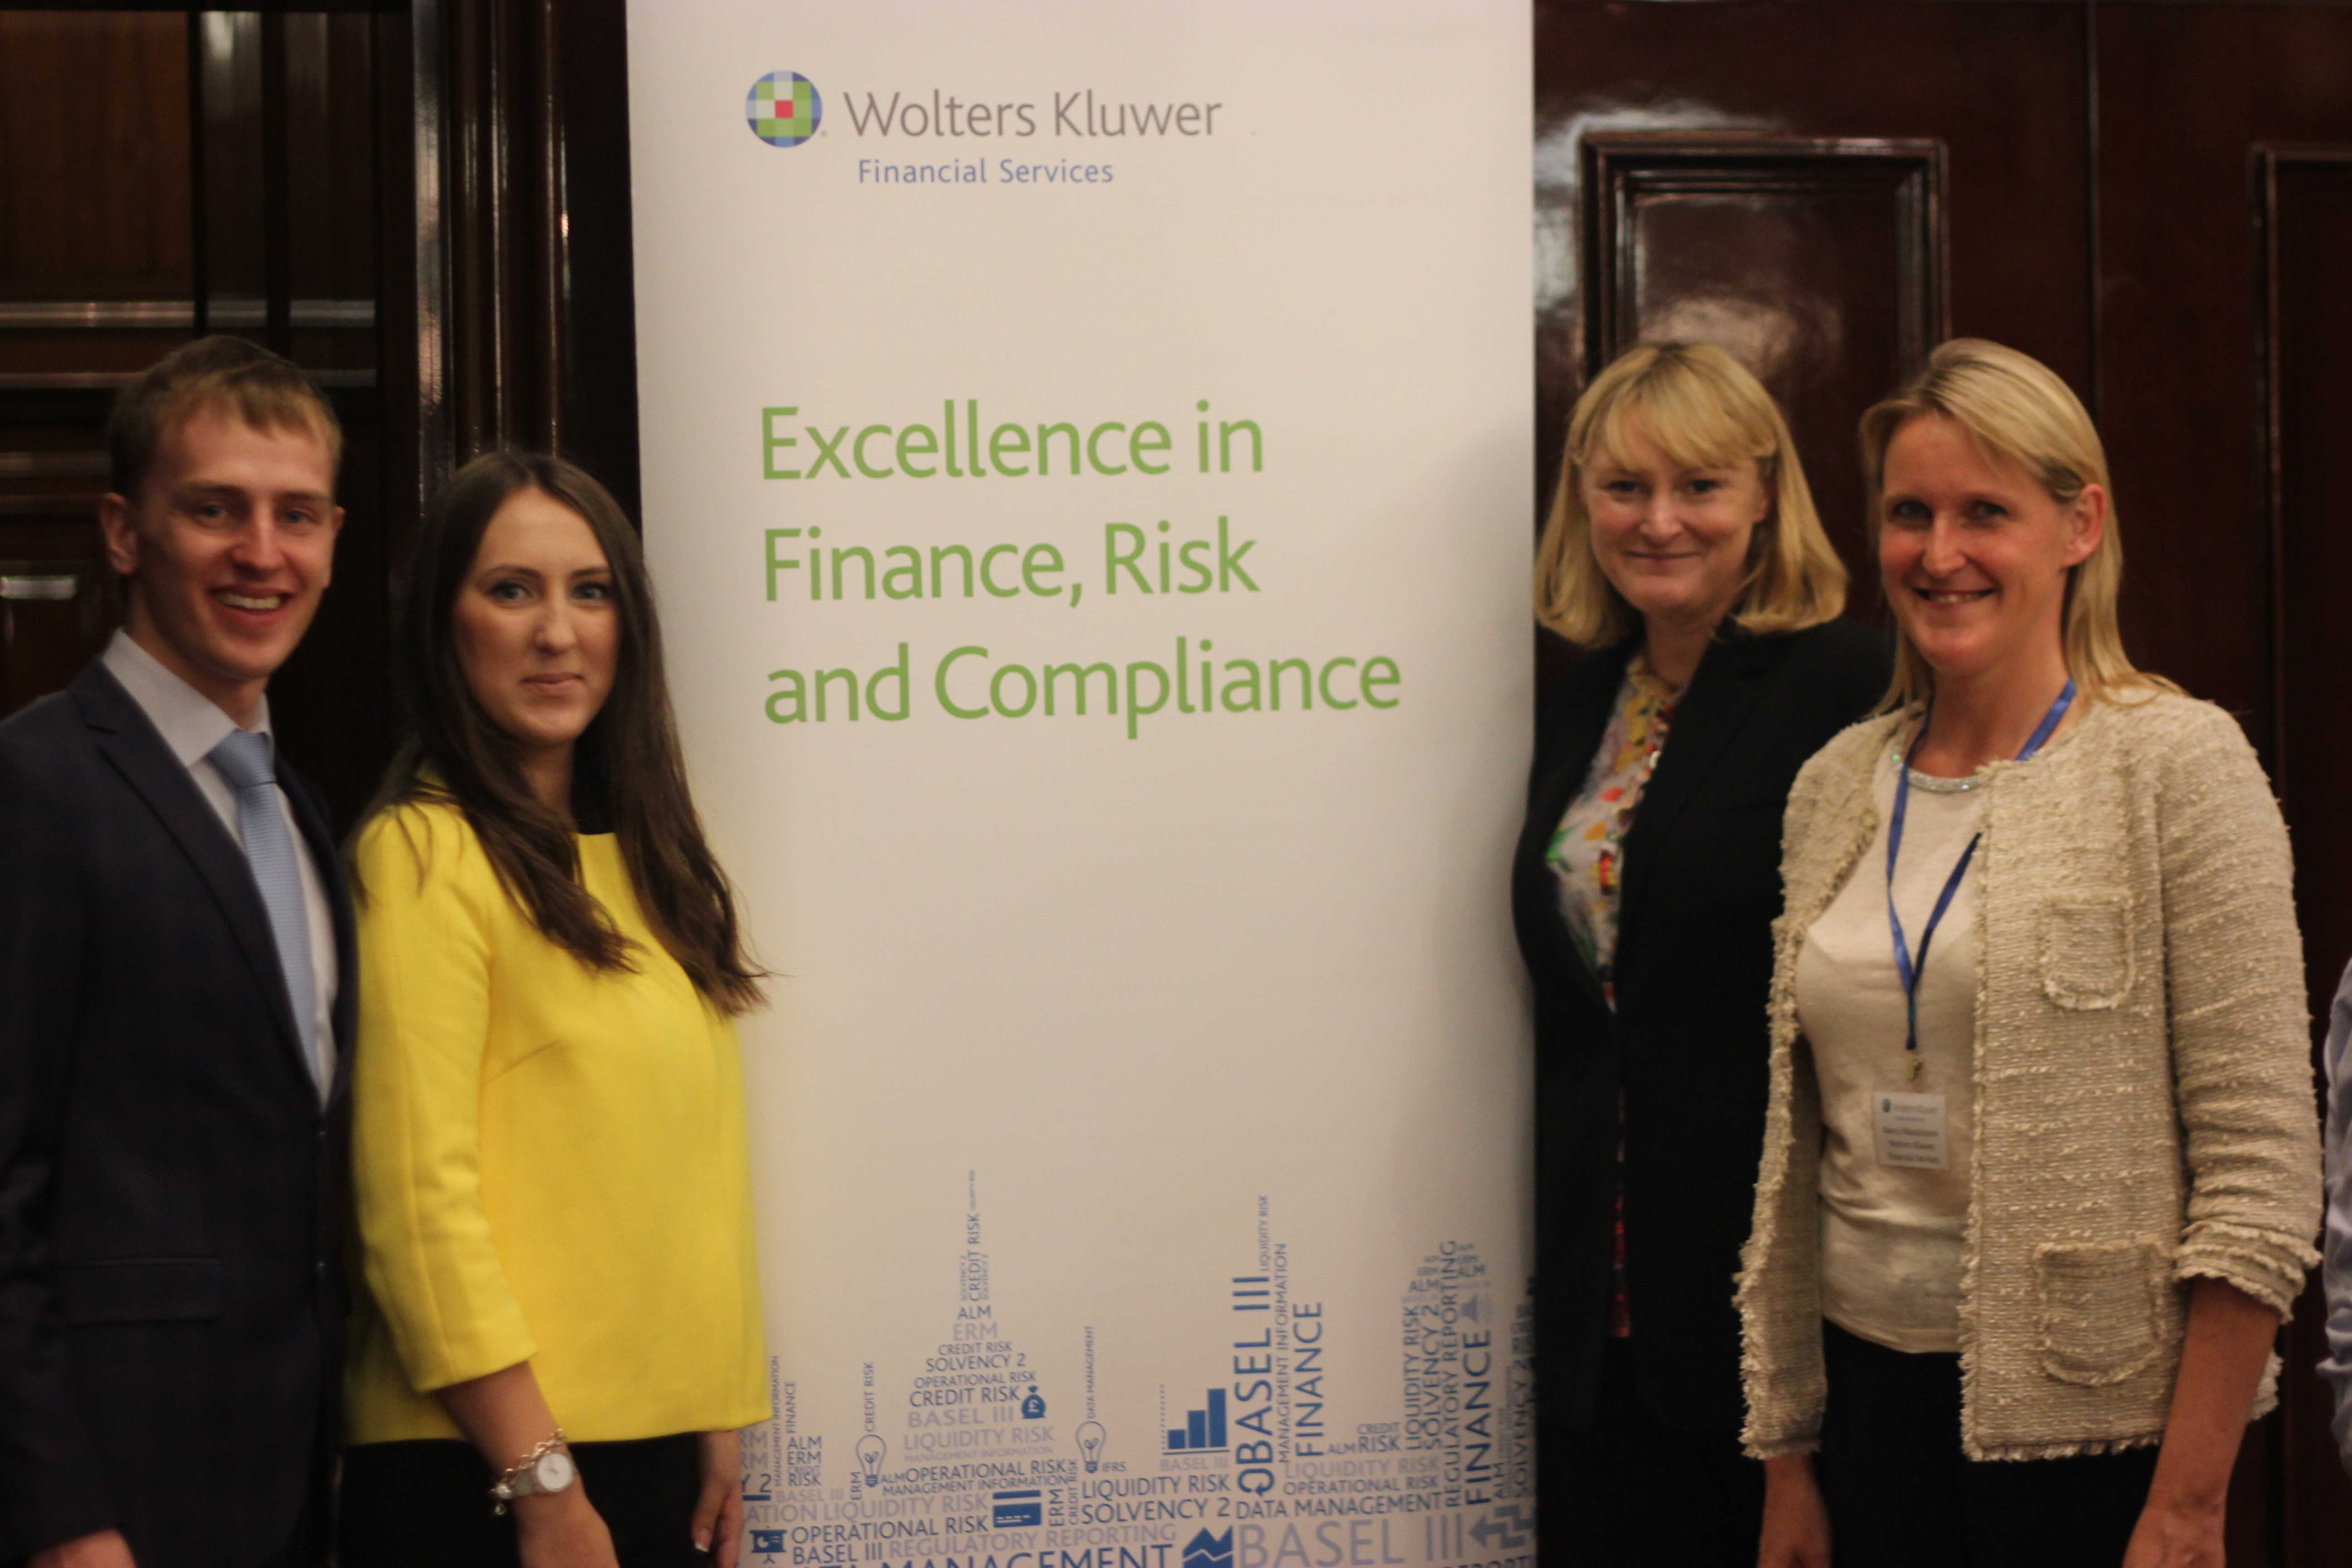 RMAA Group organized Financial Markets Summit for Wolters Kluwer FS, pic. 1